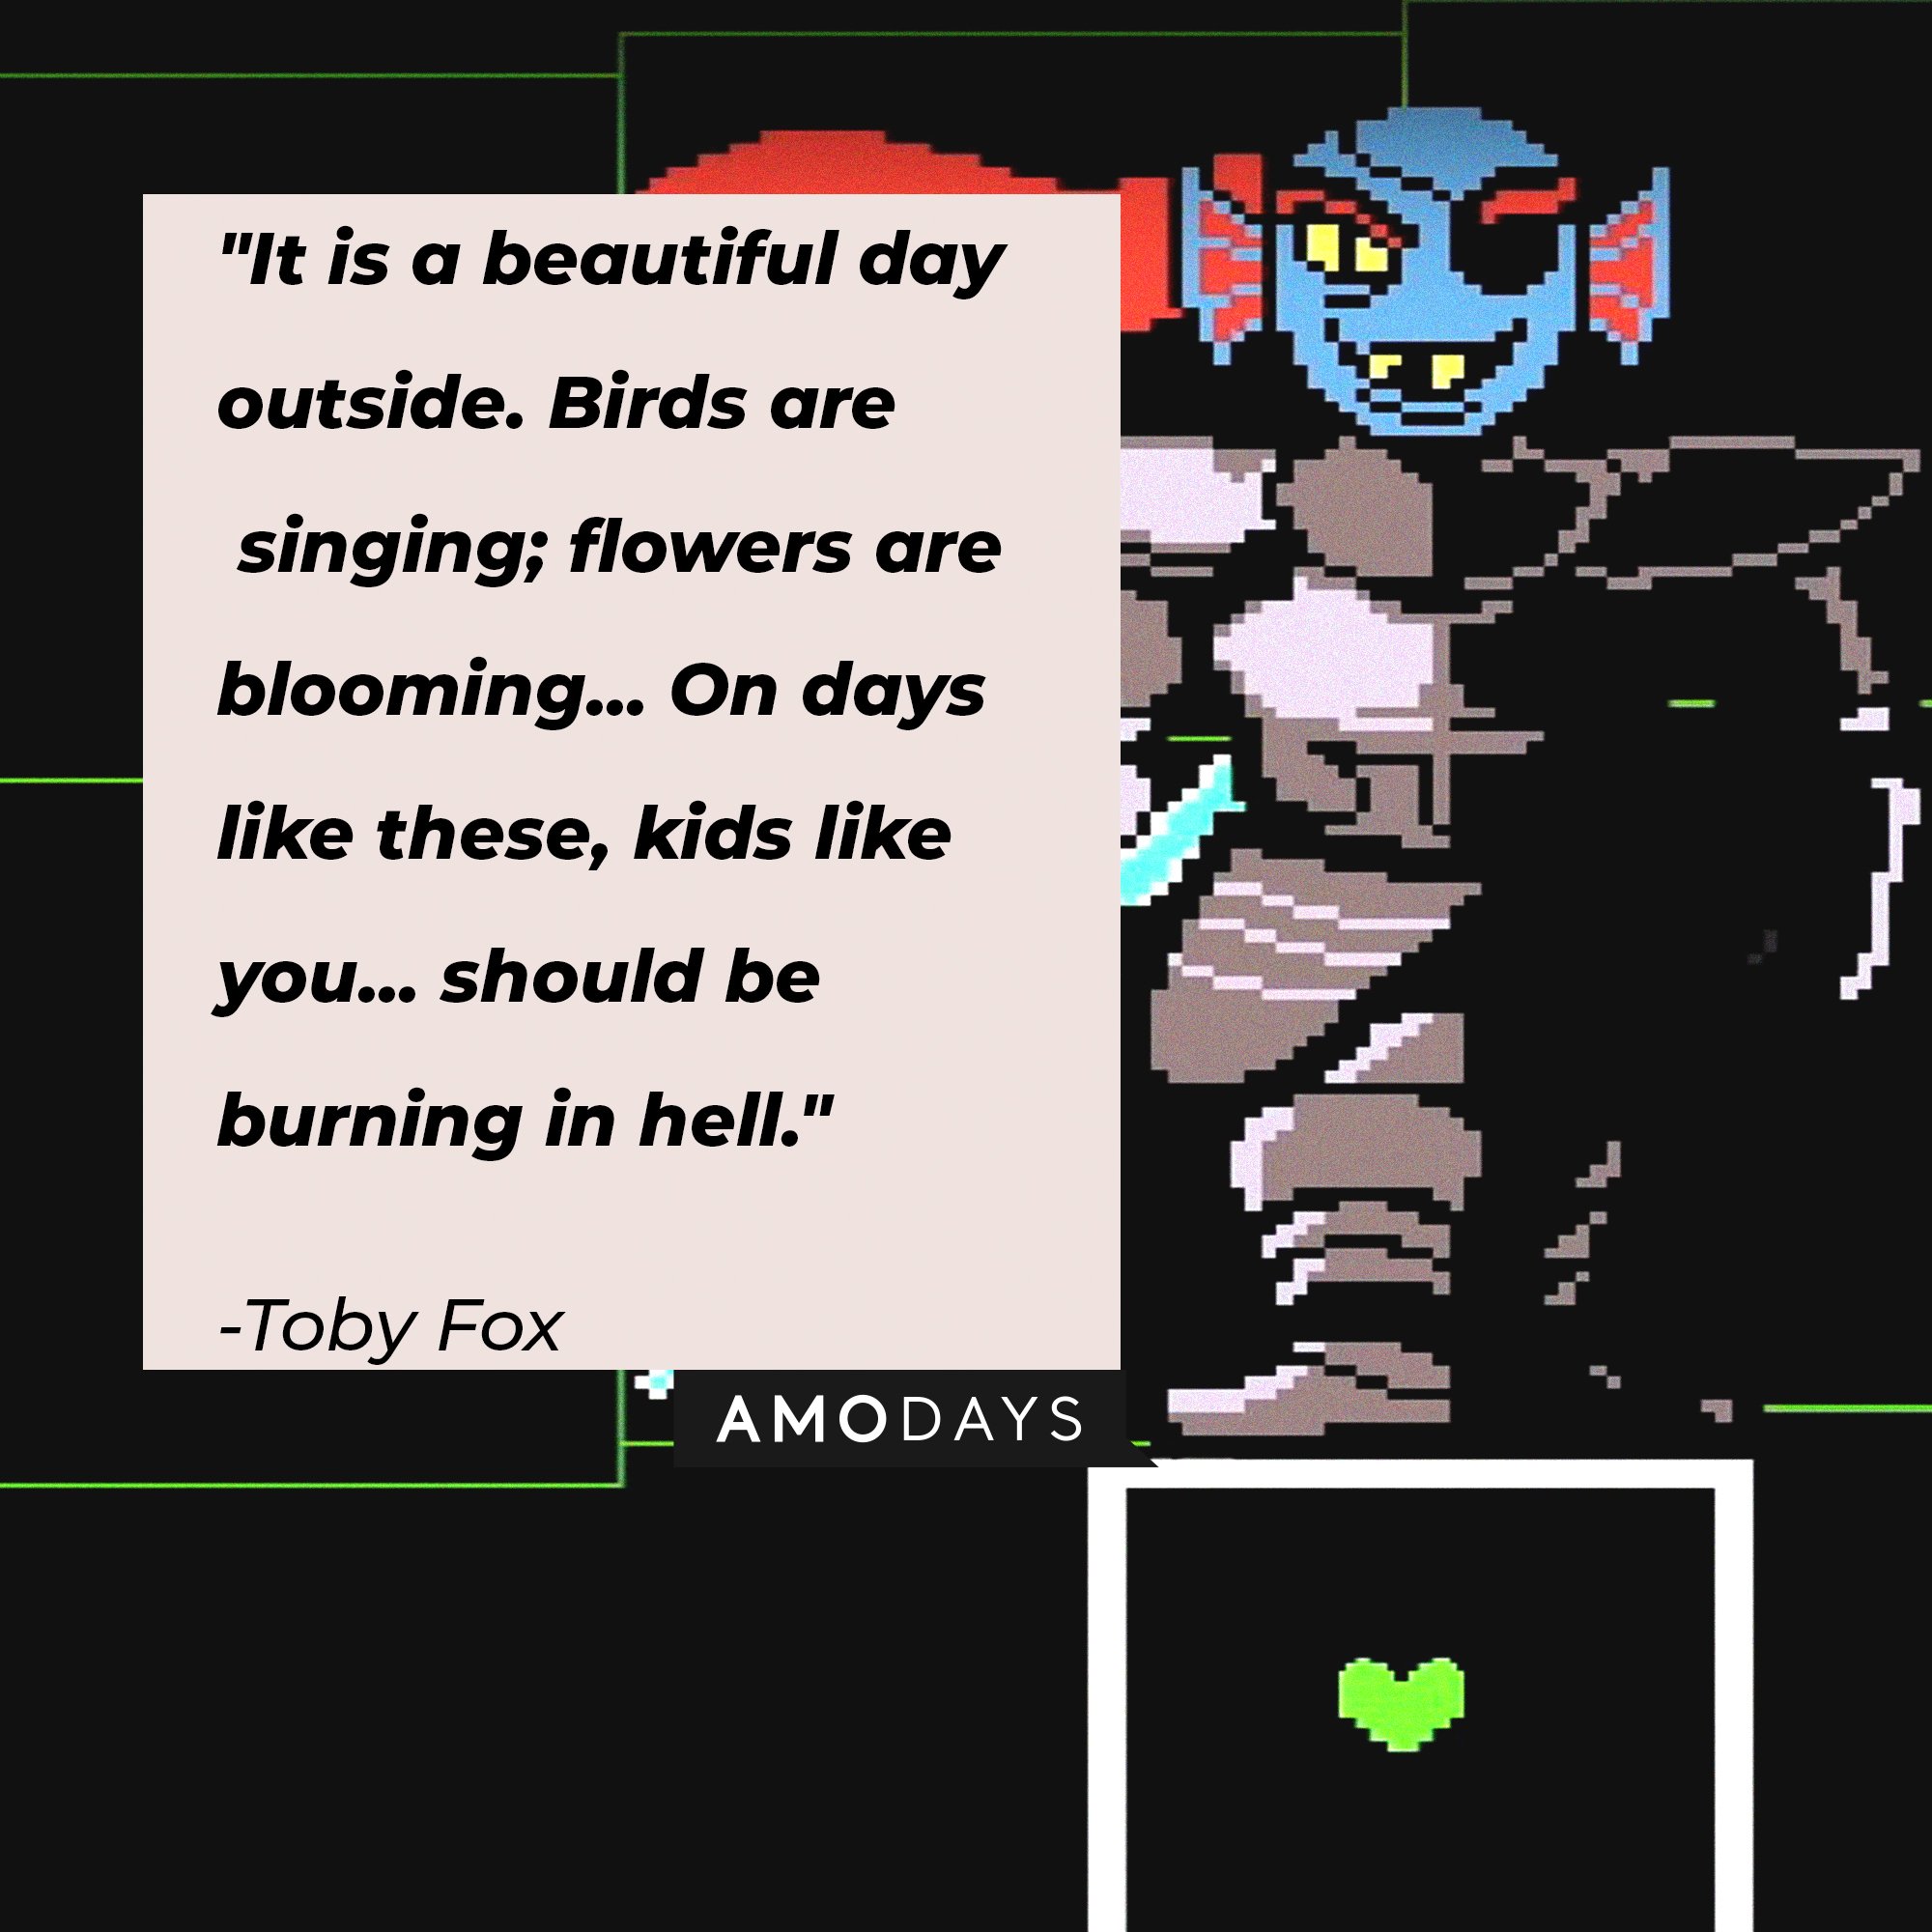  Toby Fox‘s quote: "It is a beautiful day outside. Birds are singing; flowers are blooming... On days like these, kids like you... should be burning in hell." | Image: AmoDays